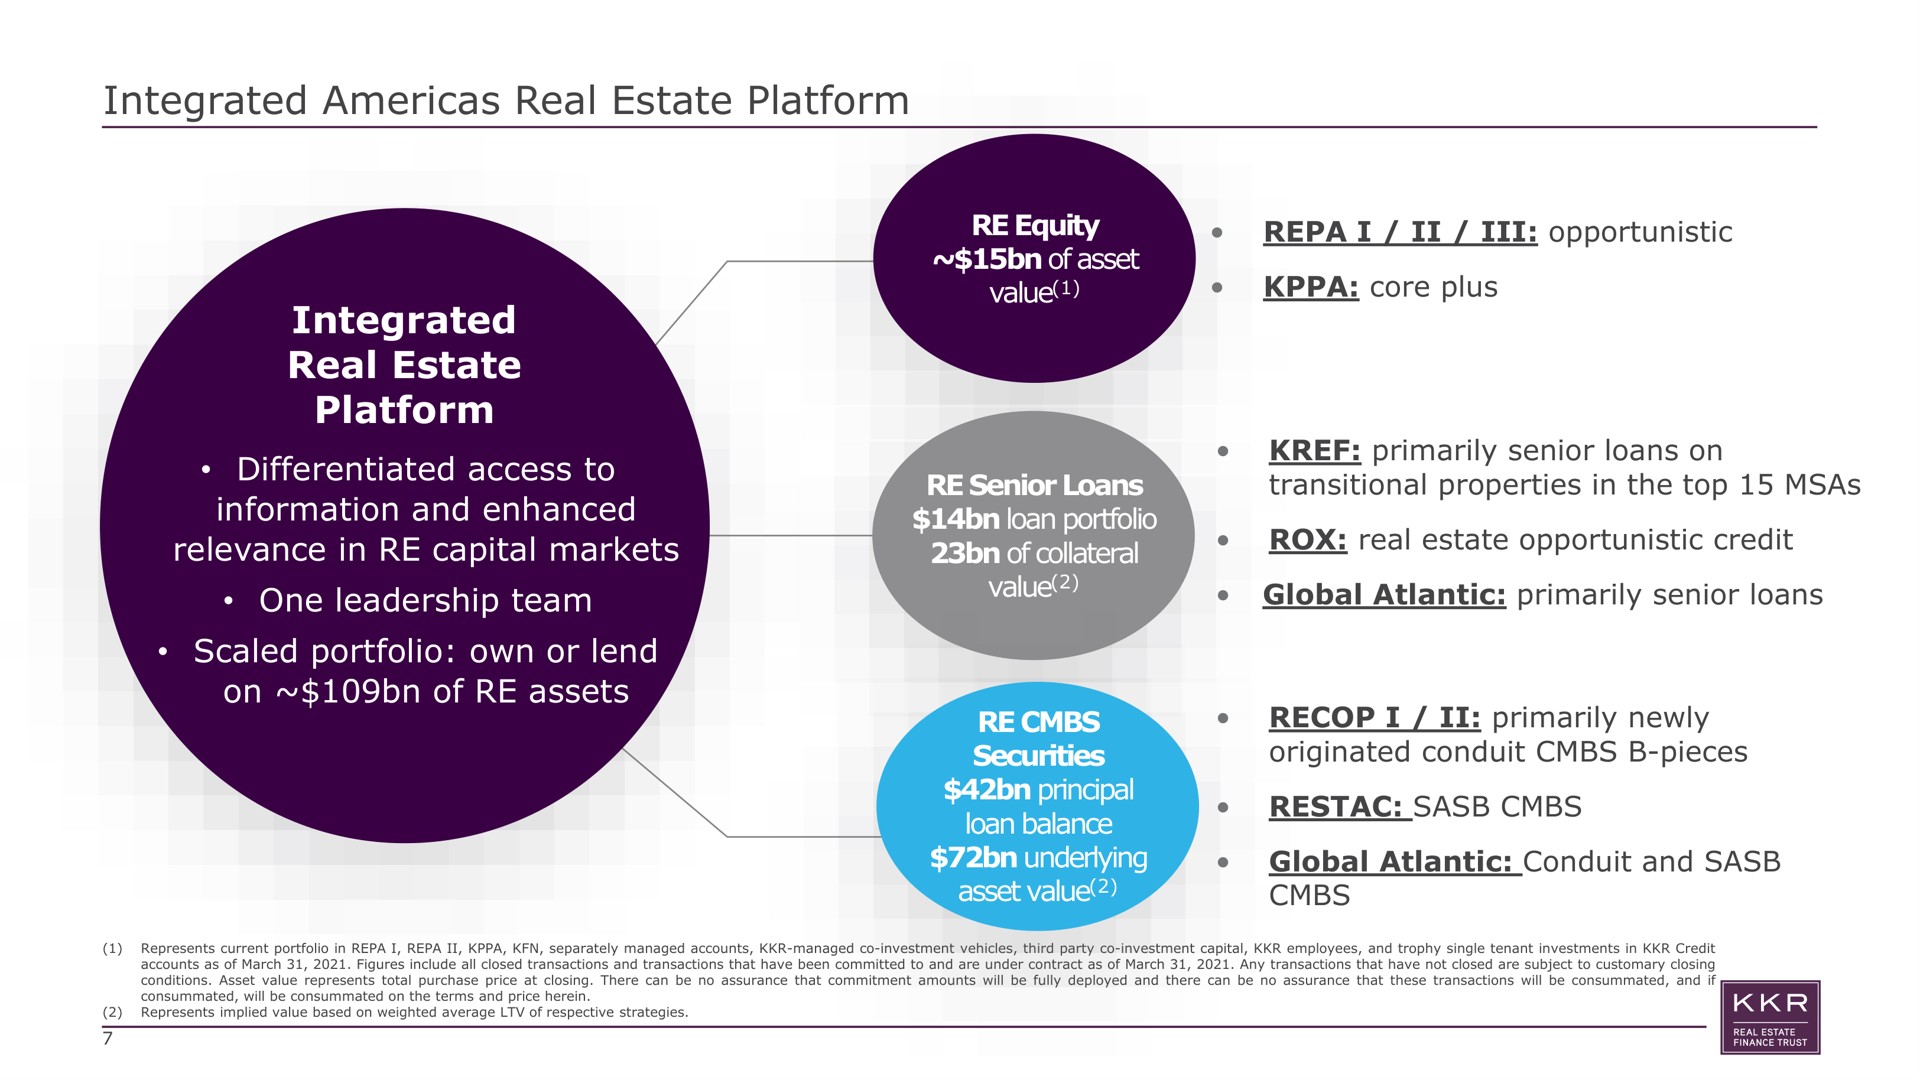 integrated real estate platform integrated real estate platform differentiated access to information and enhanced relevance in capital markets one leadership team scaled portfolio own or lend on of assets equity of asset value i opportunistic core plus senior loans loan portfolio of collateral value primarily senior loans on transitional properties in the top rox real estate opportunistic credit global atlantic primarily senior loans securities principal loan balance underlying asset value i primarily newly originated conduit pieces global atlantic conduit and | KKR Real Estate Finance Trust